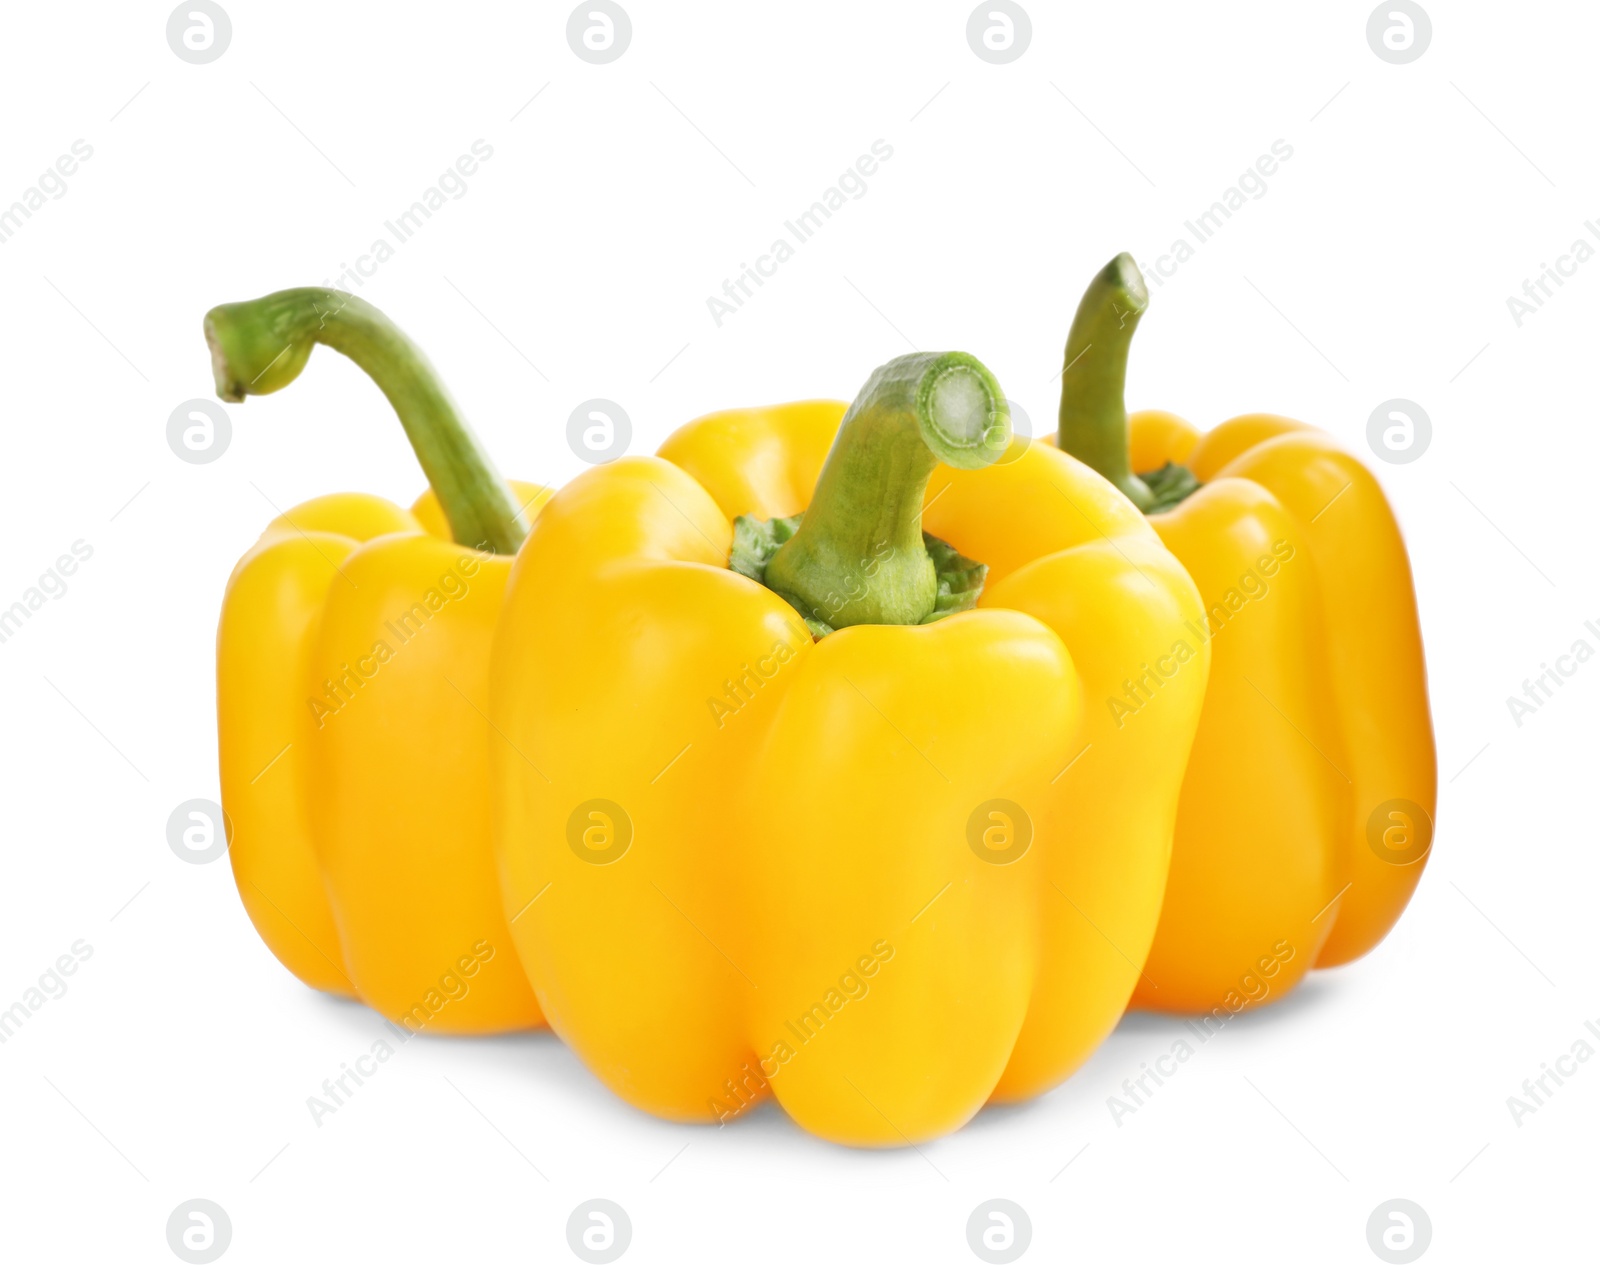 Photo of Ripe yellow bell peppers isolated on white